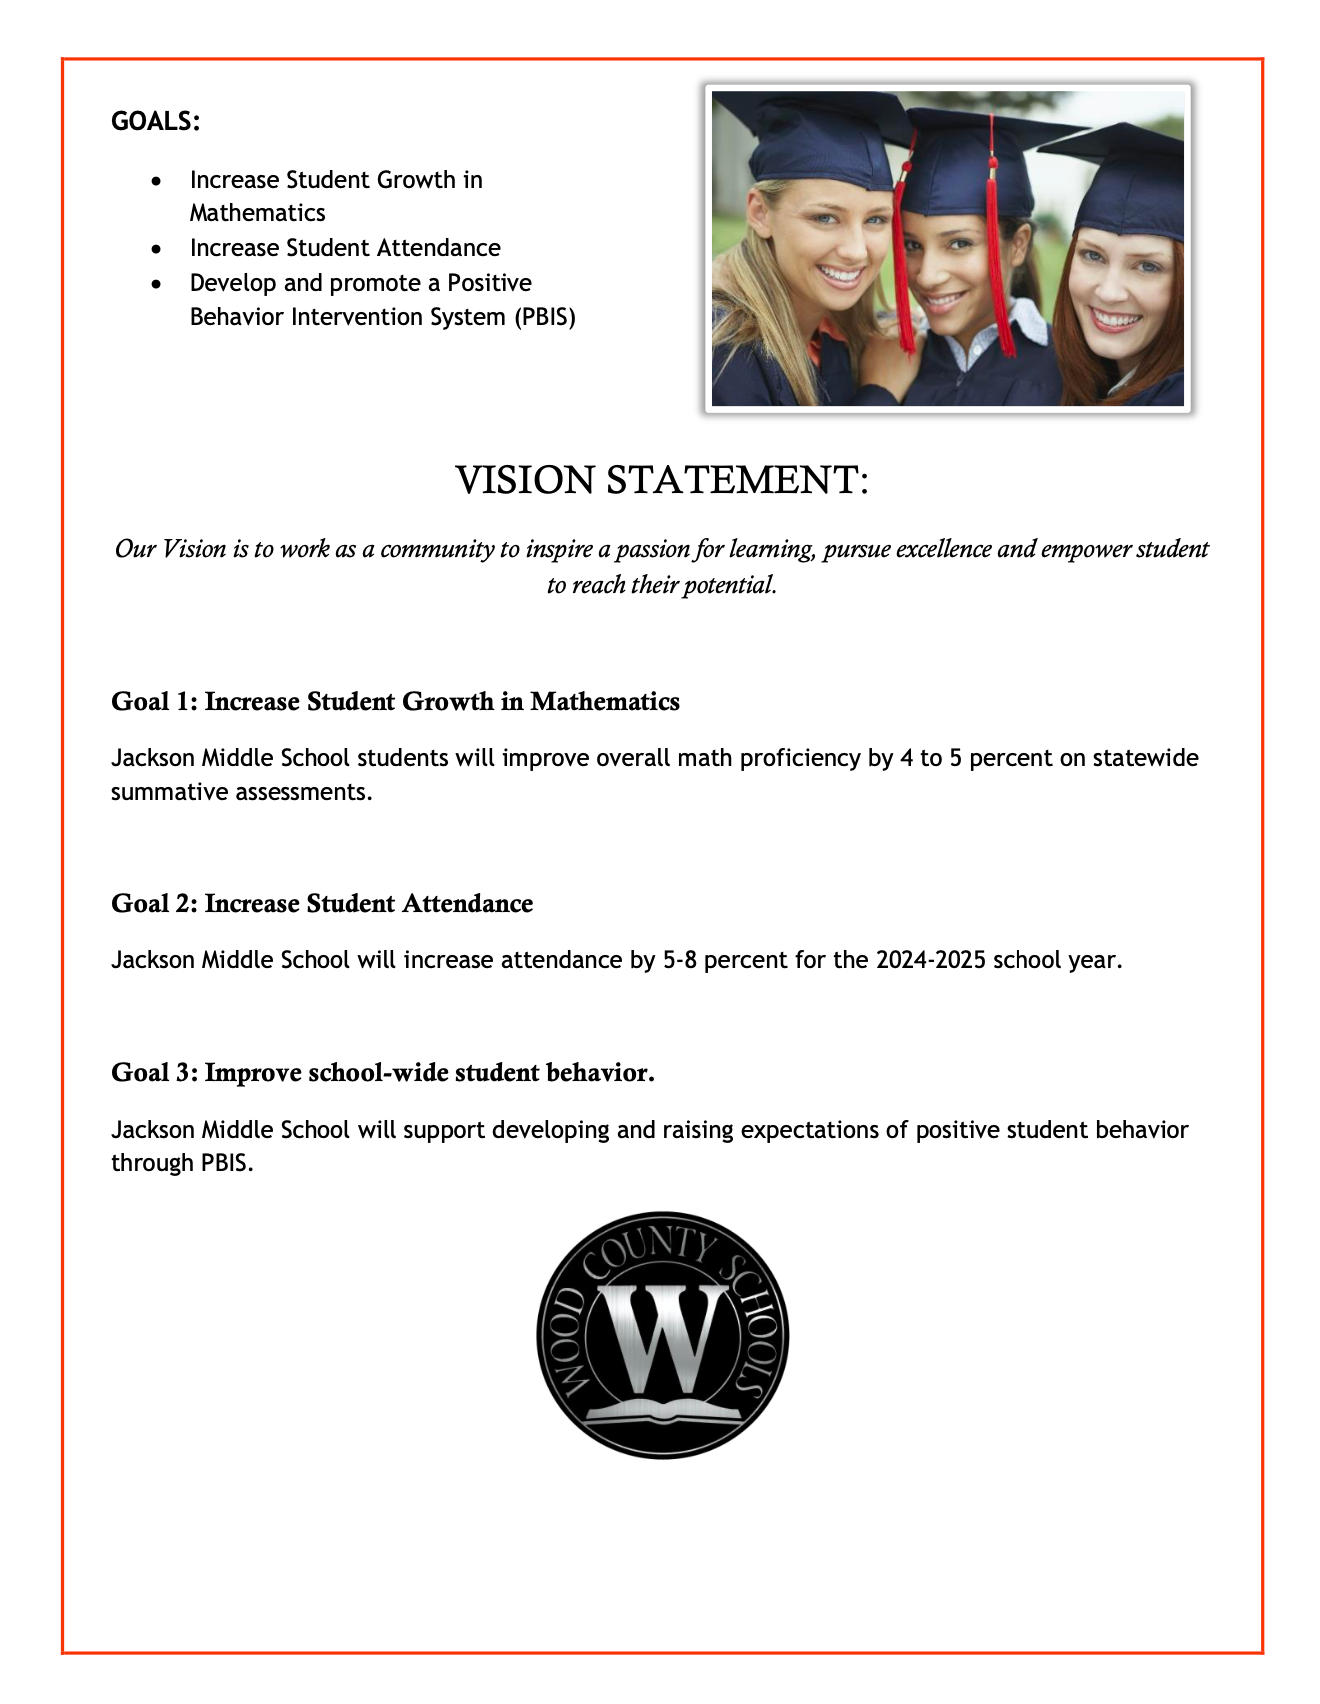 Goals and Vision Statement